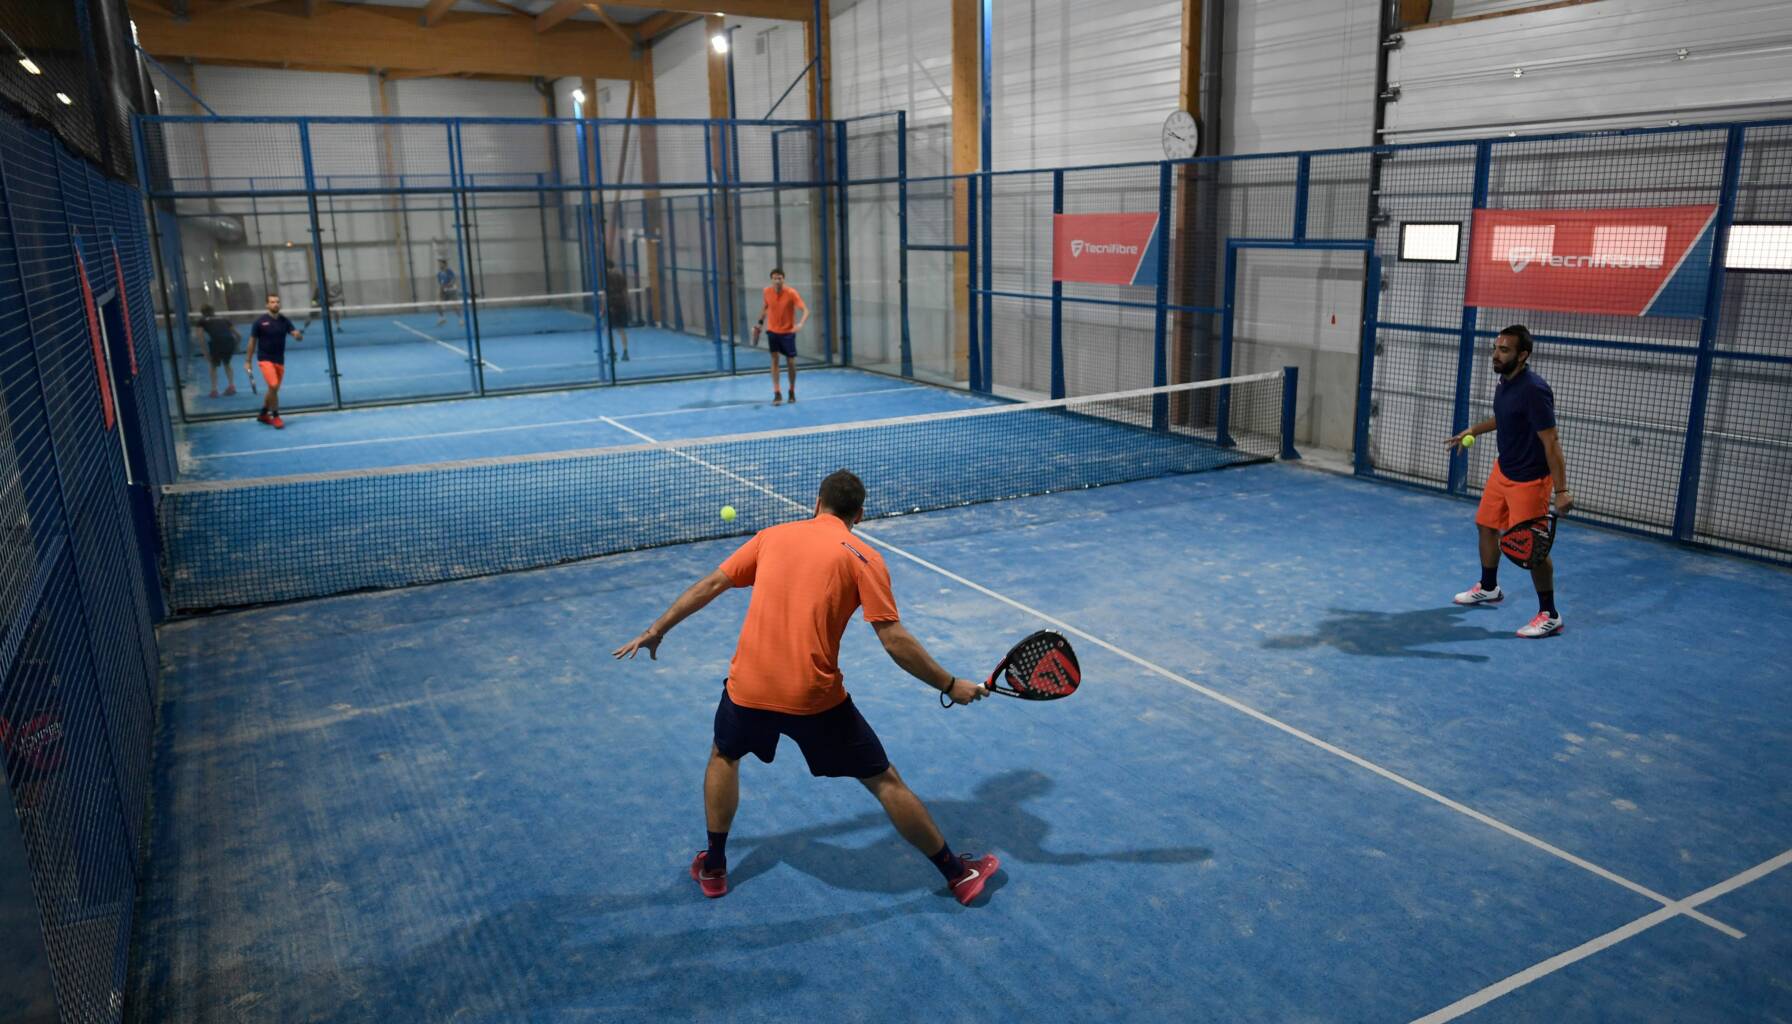 People play a padel match on October 10, 2017 in Bois d'Arcy near Paris.
Tennis champions like Nadal and Monfils have raise a new interest in padel, a trendy derivative of tennis. / AFP PHOTO / STEPHANE DE SAKUTIN        (Photo credit should read STEPHANE DE SAKUTIN/AFP via Getty Images)